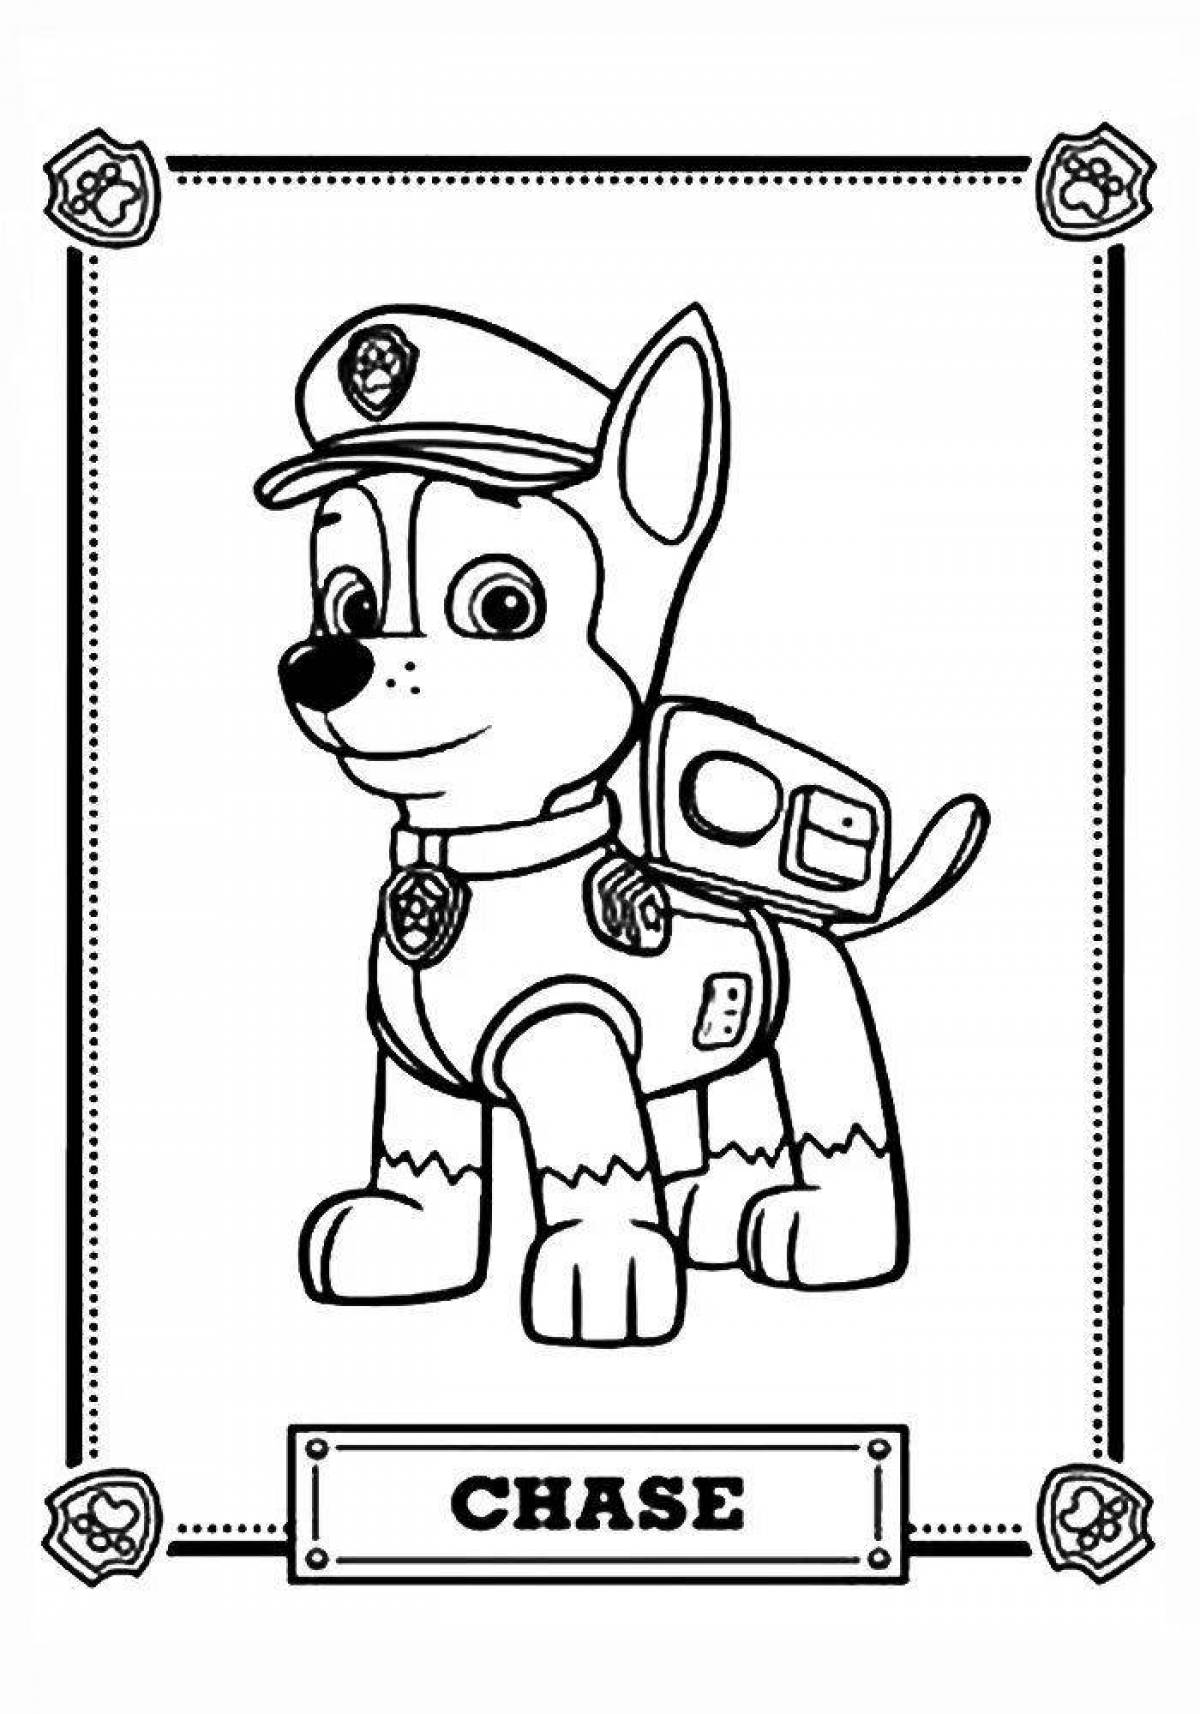 Coloring page amazing racer